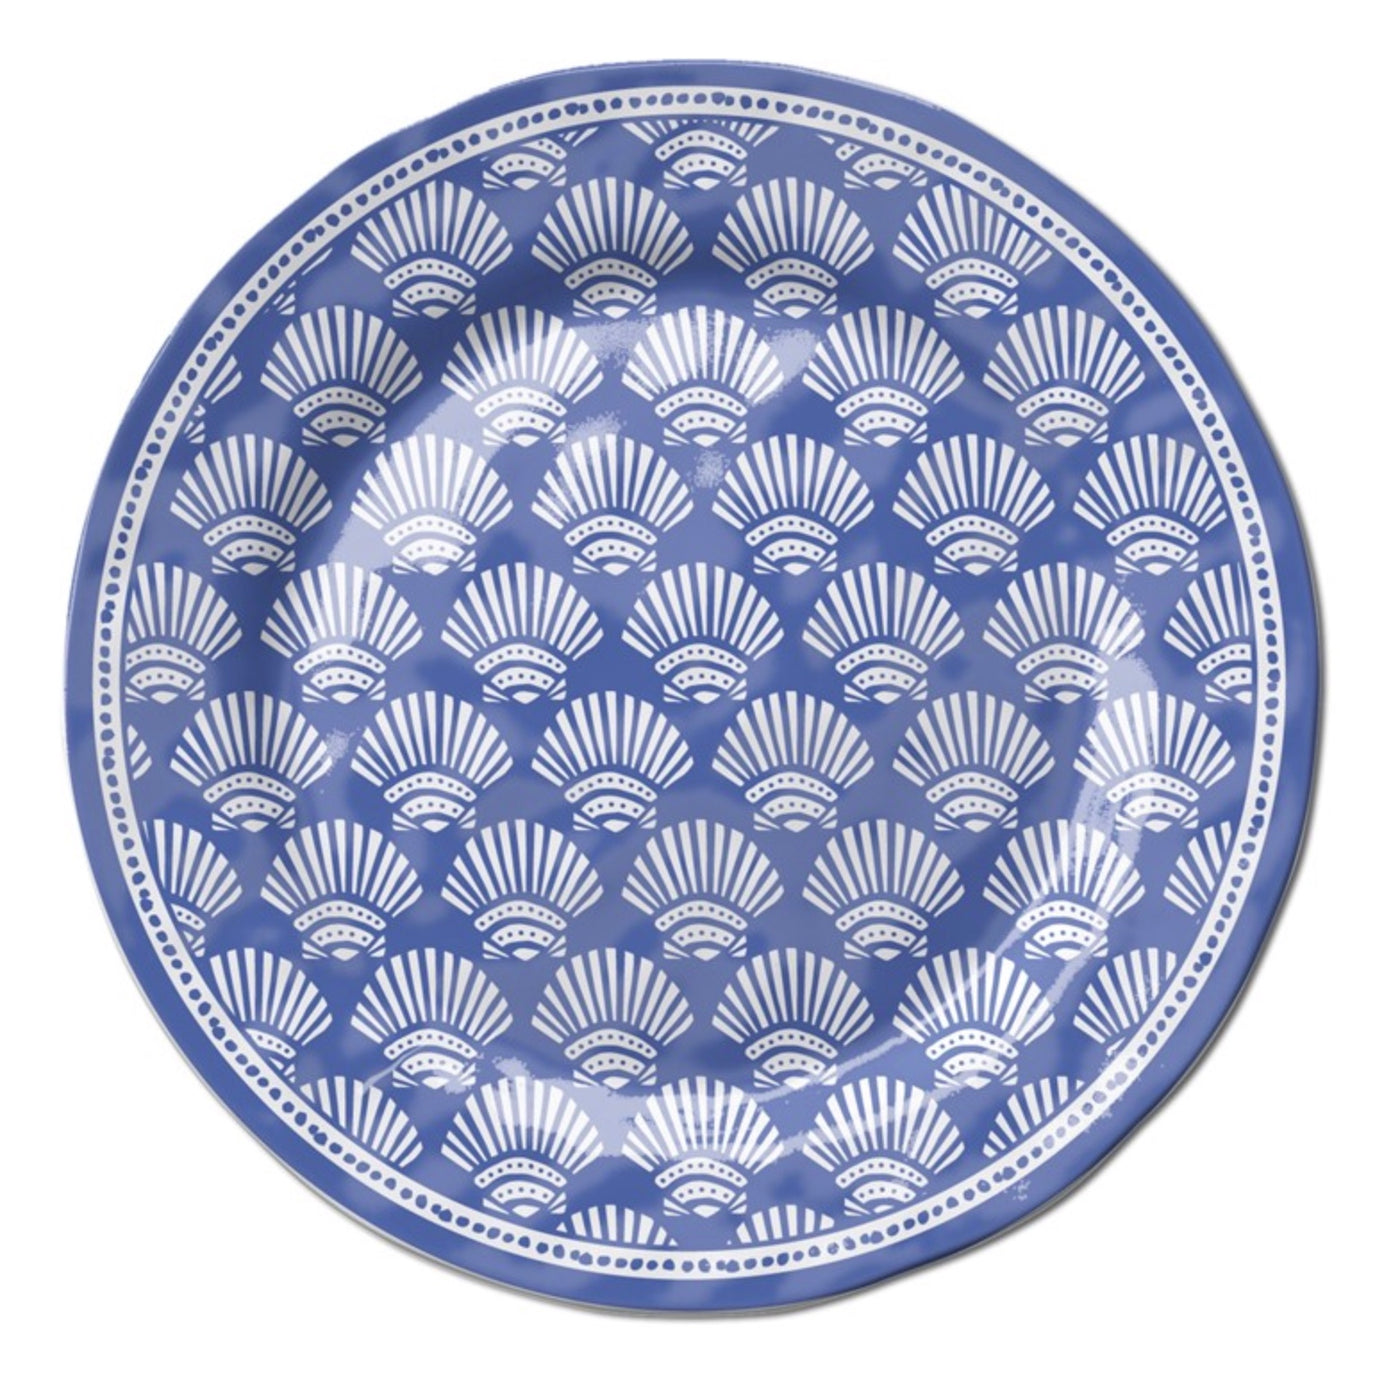 Periwinkle Shell Dinner Plate